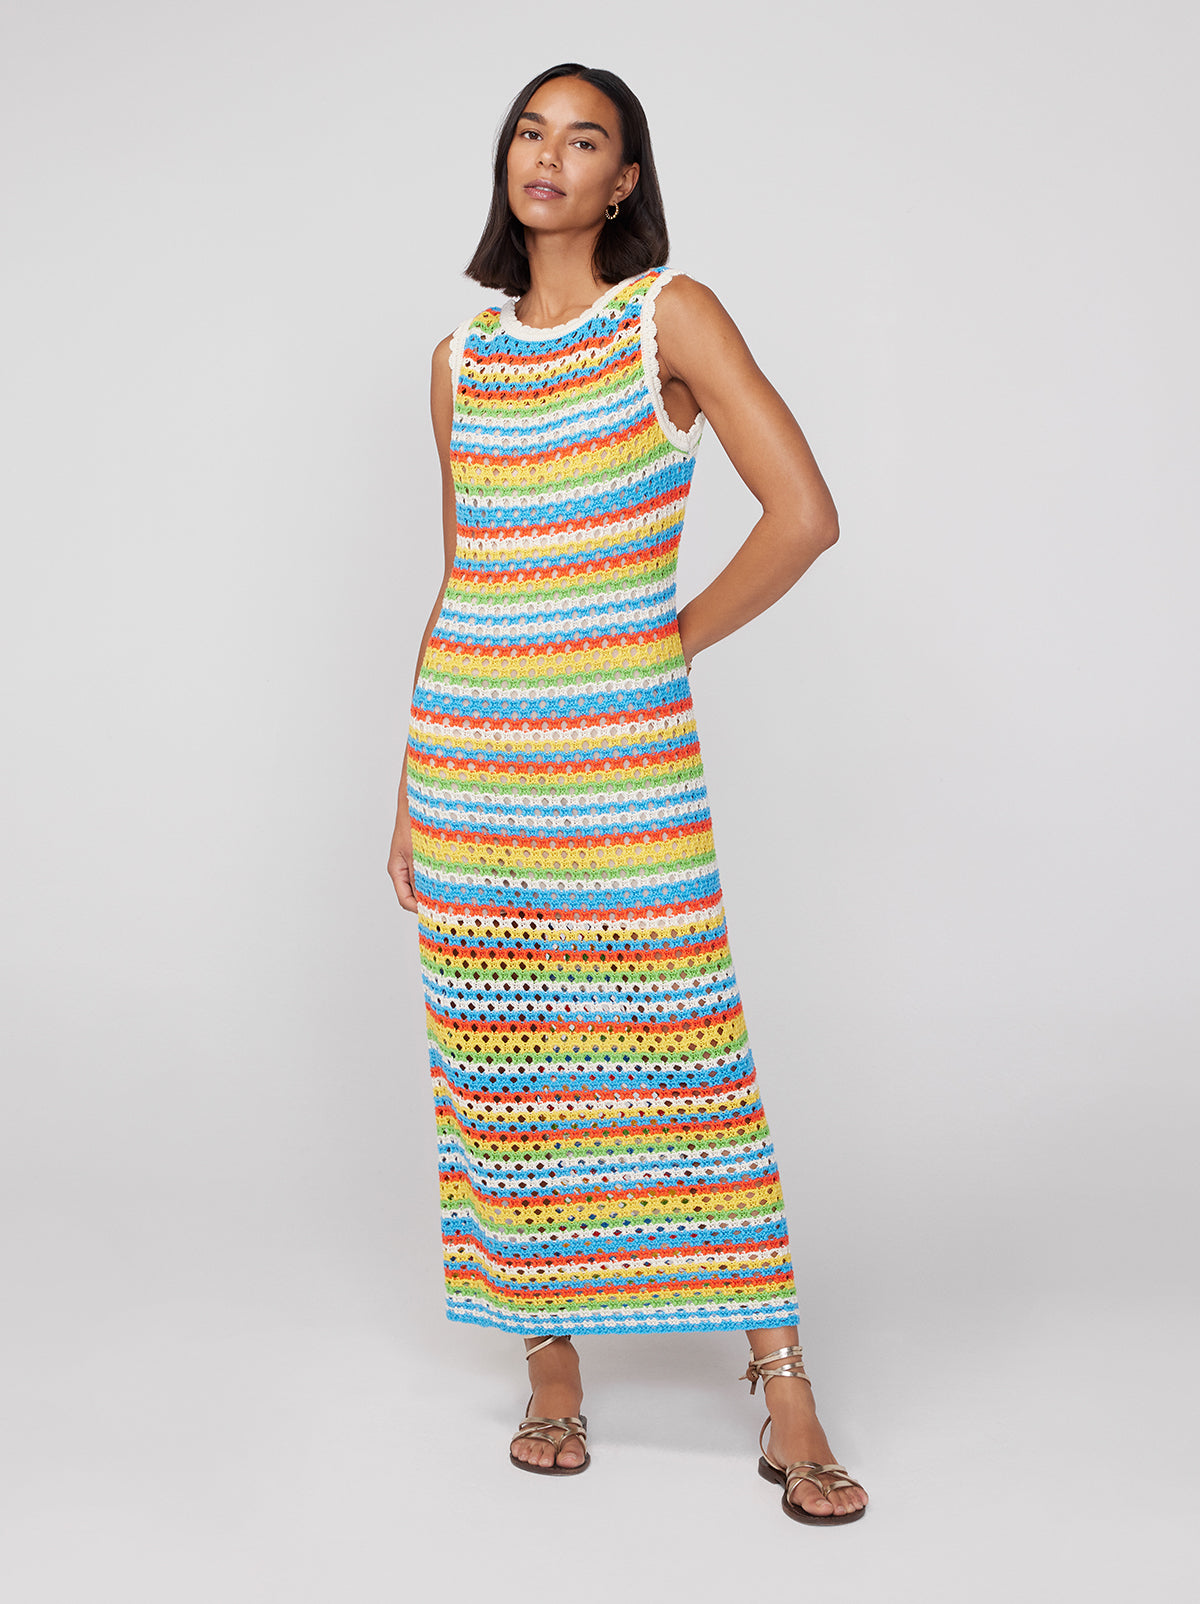 Bunty Blue Stripe Crochet Knit Dress By KITRI Studio with a flattering fit around the chest and straight fit in the skirt. An ideal beach midi dress to throw over a swimsuit it features a summary rainbow pattern with colourful horizontal lines in 100% cotton crochet knitted design